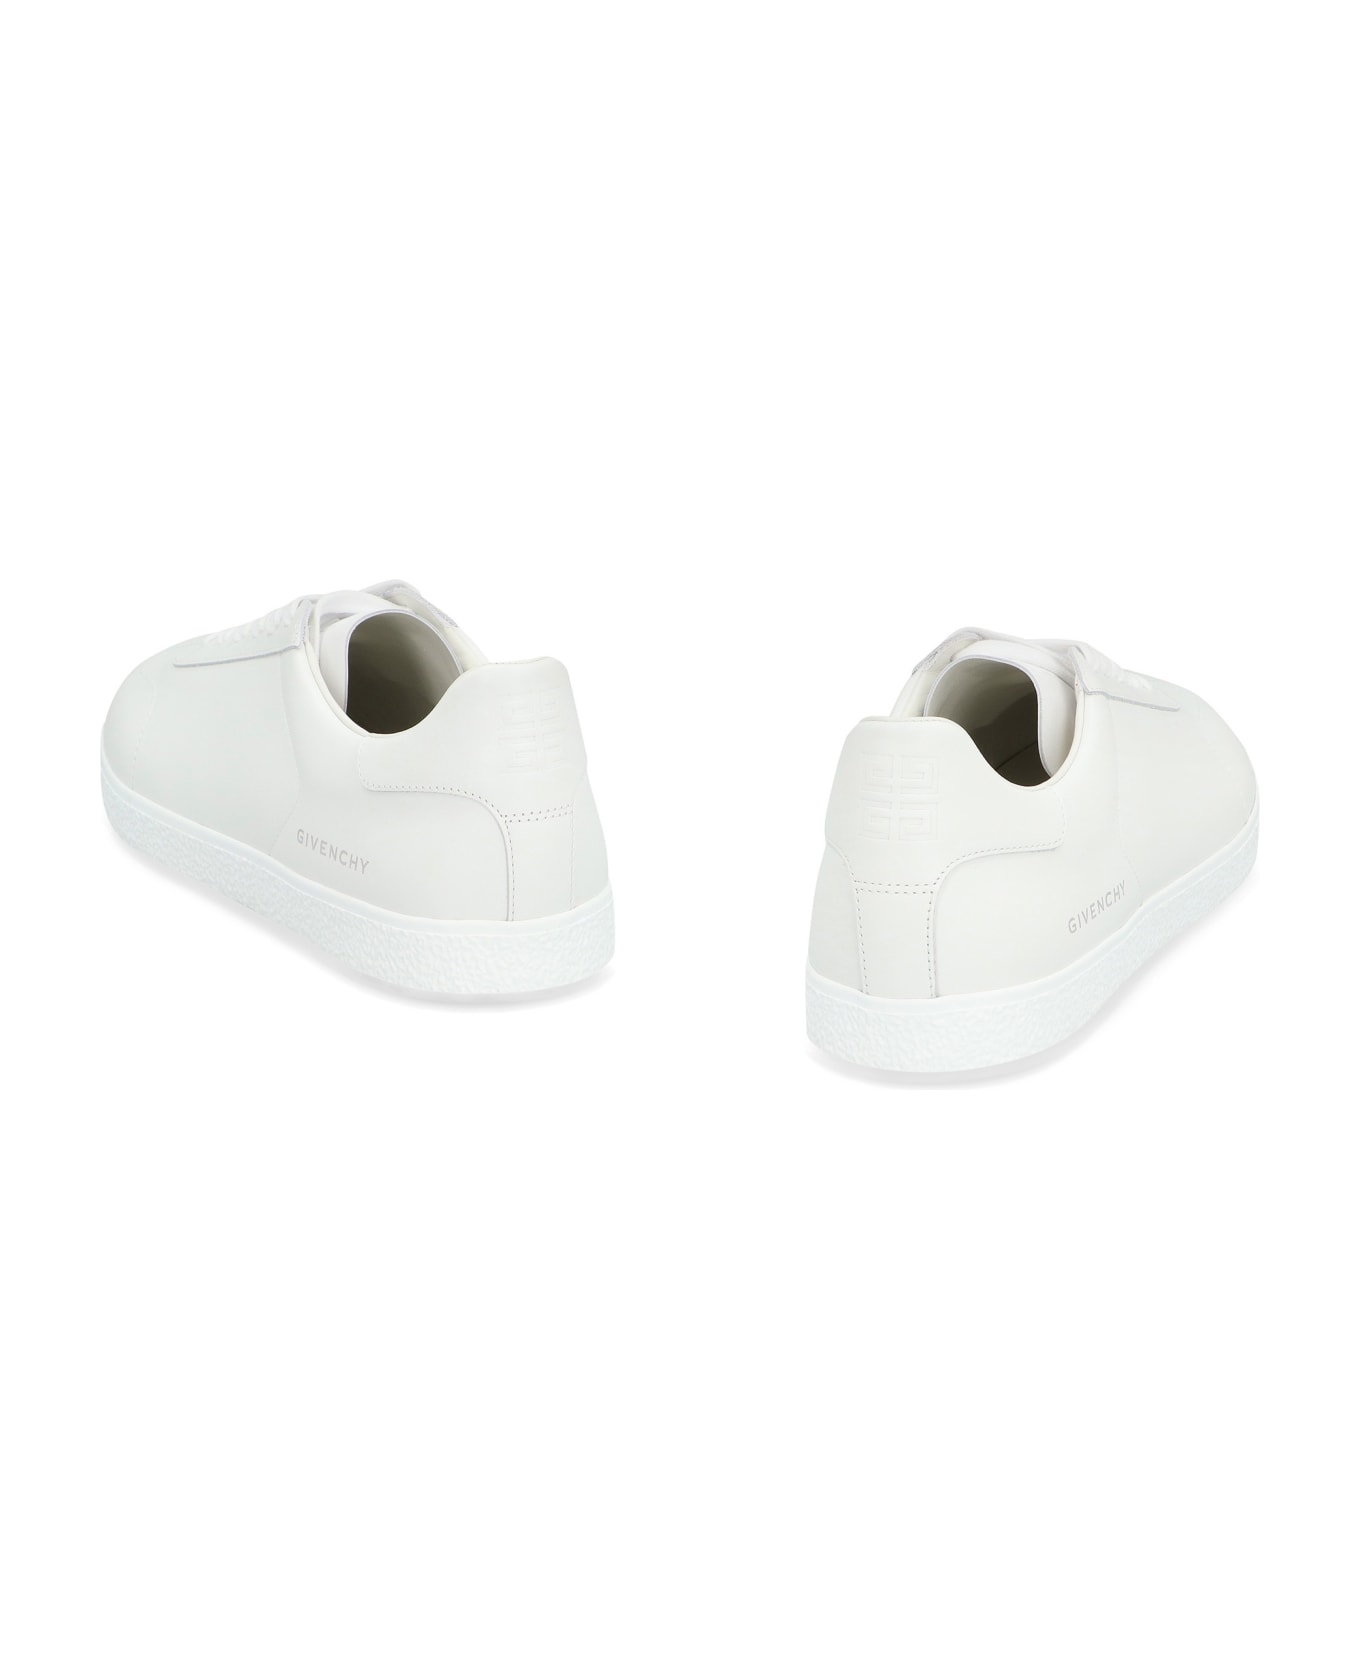 Givenchy Town Leather Low-top Sneakers - White